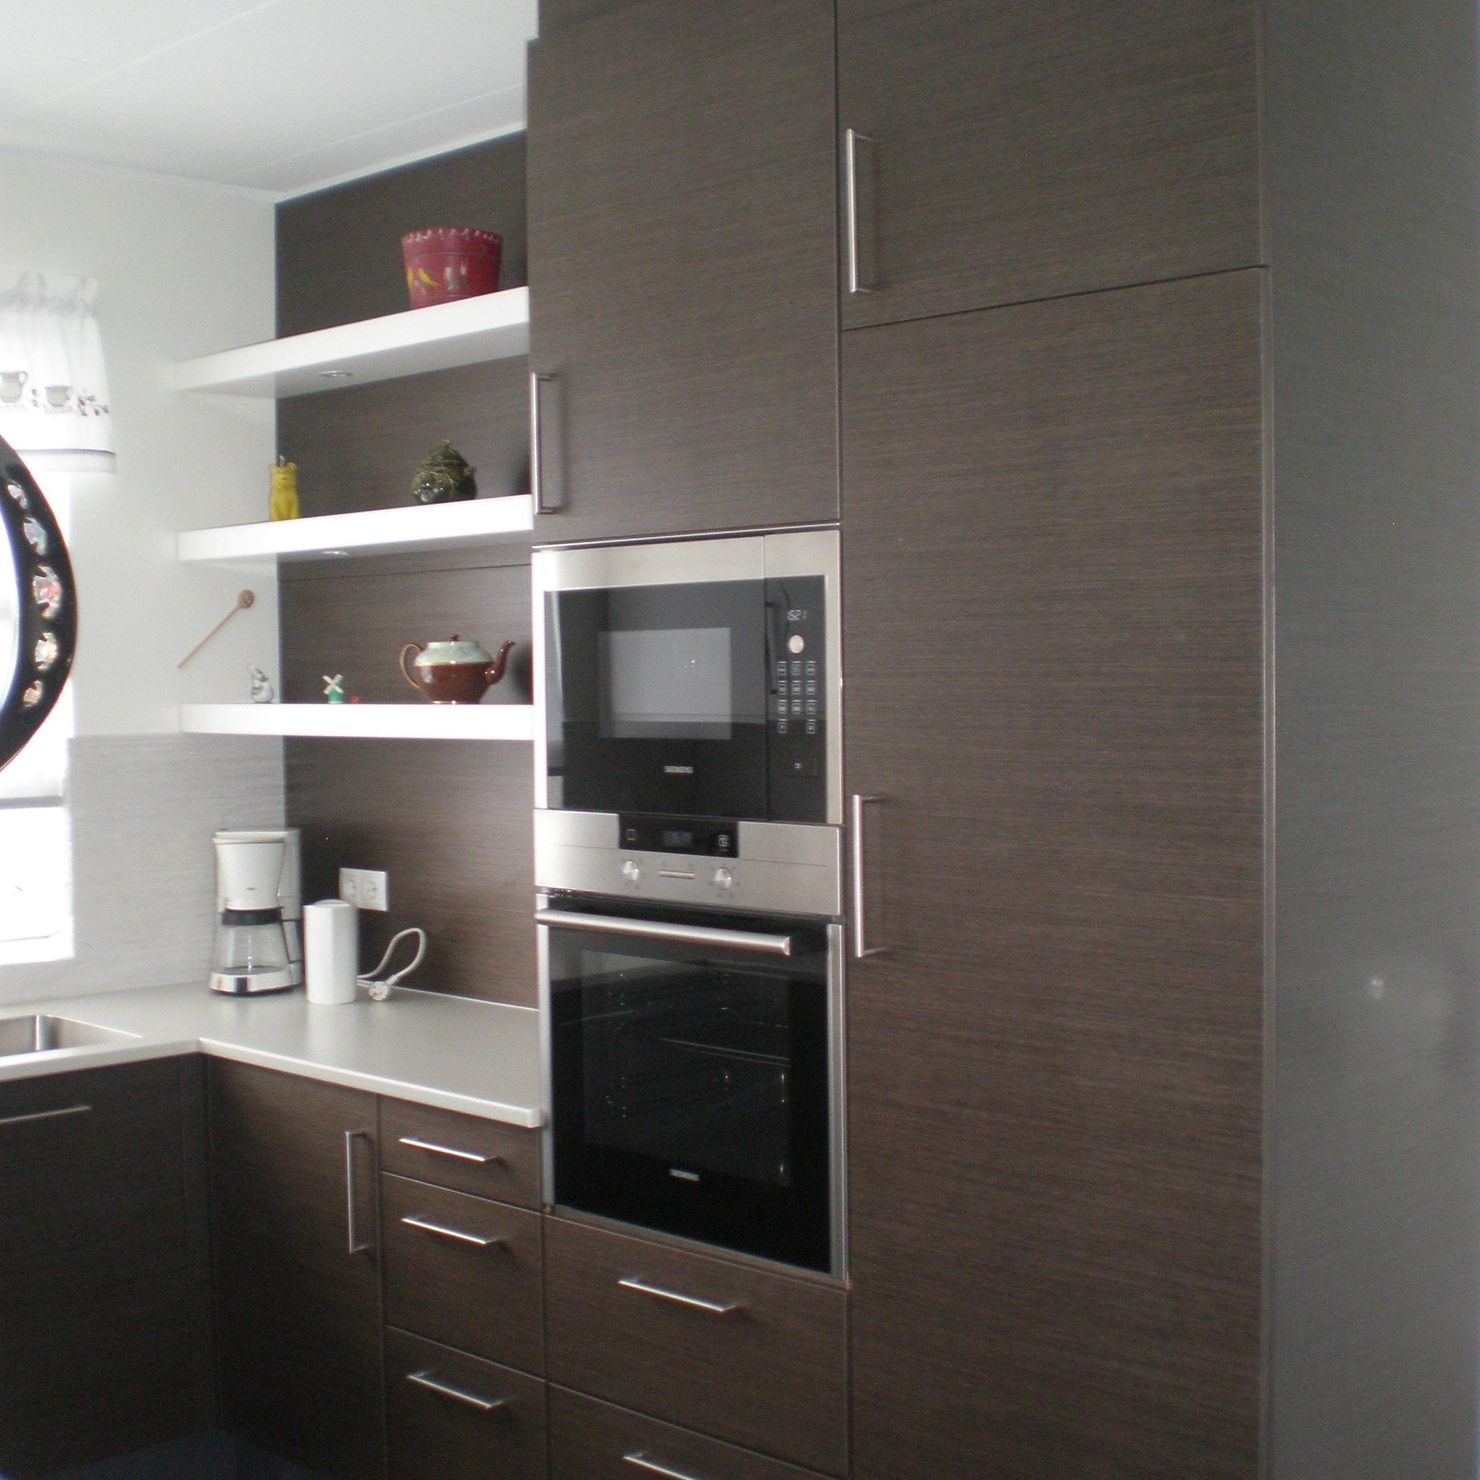 Perfect for a great dinner: the kitchen is modern and fully equipped